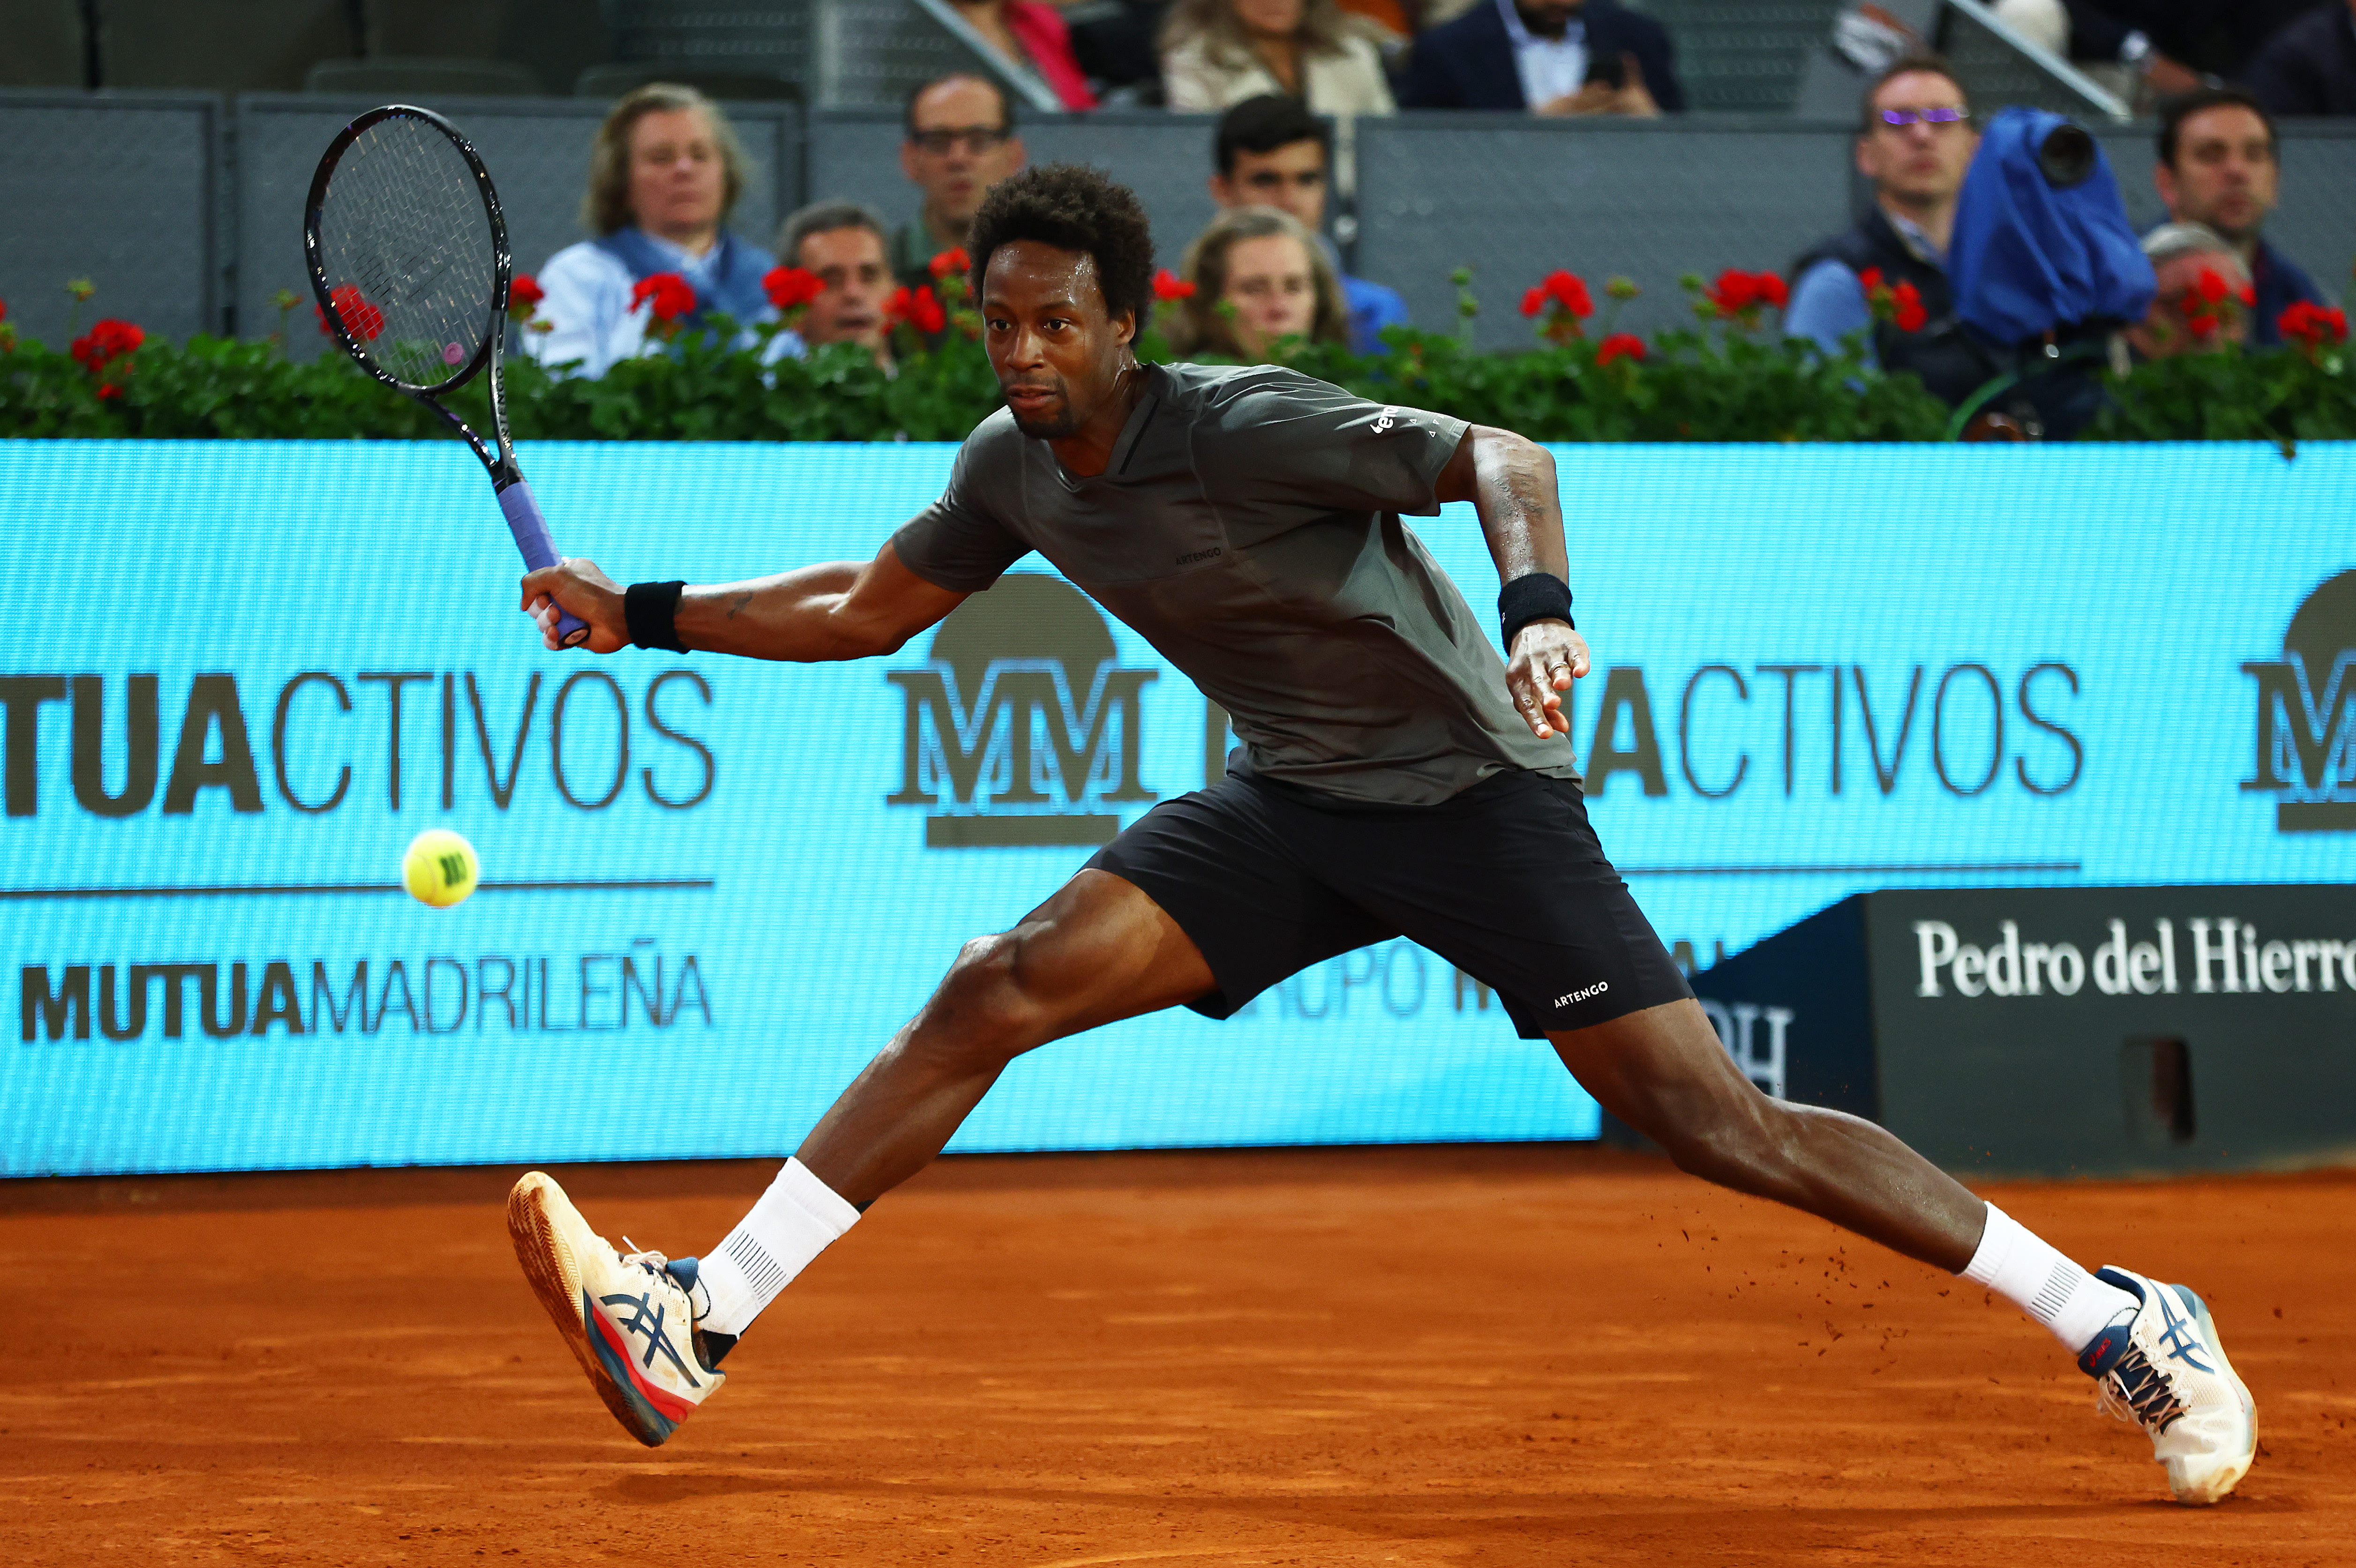 Gael Monfils joins Matteo Berrettini in withdrawing from Roland Garros